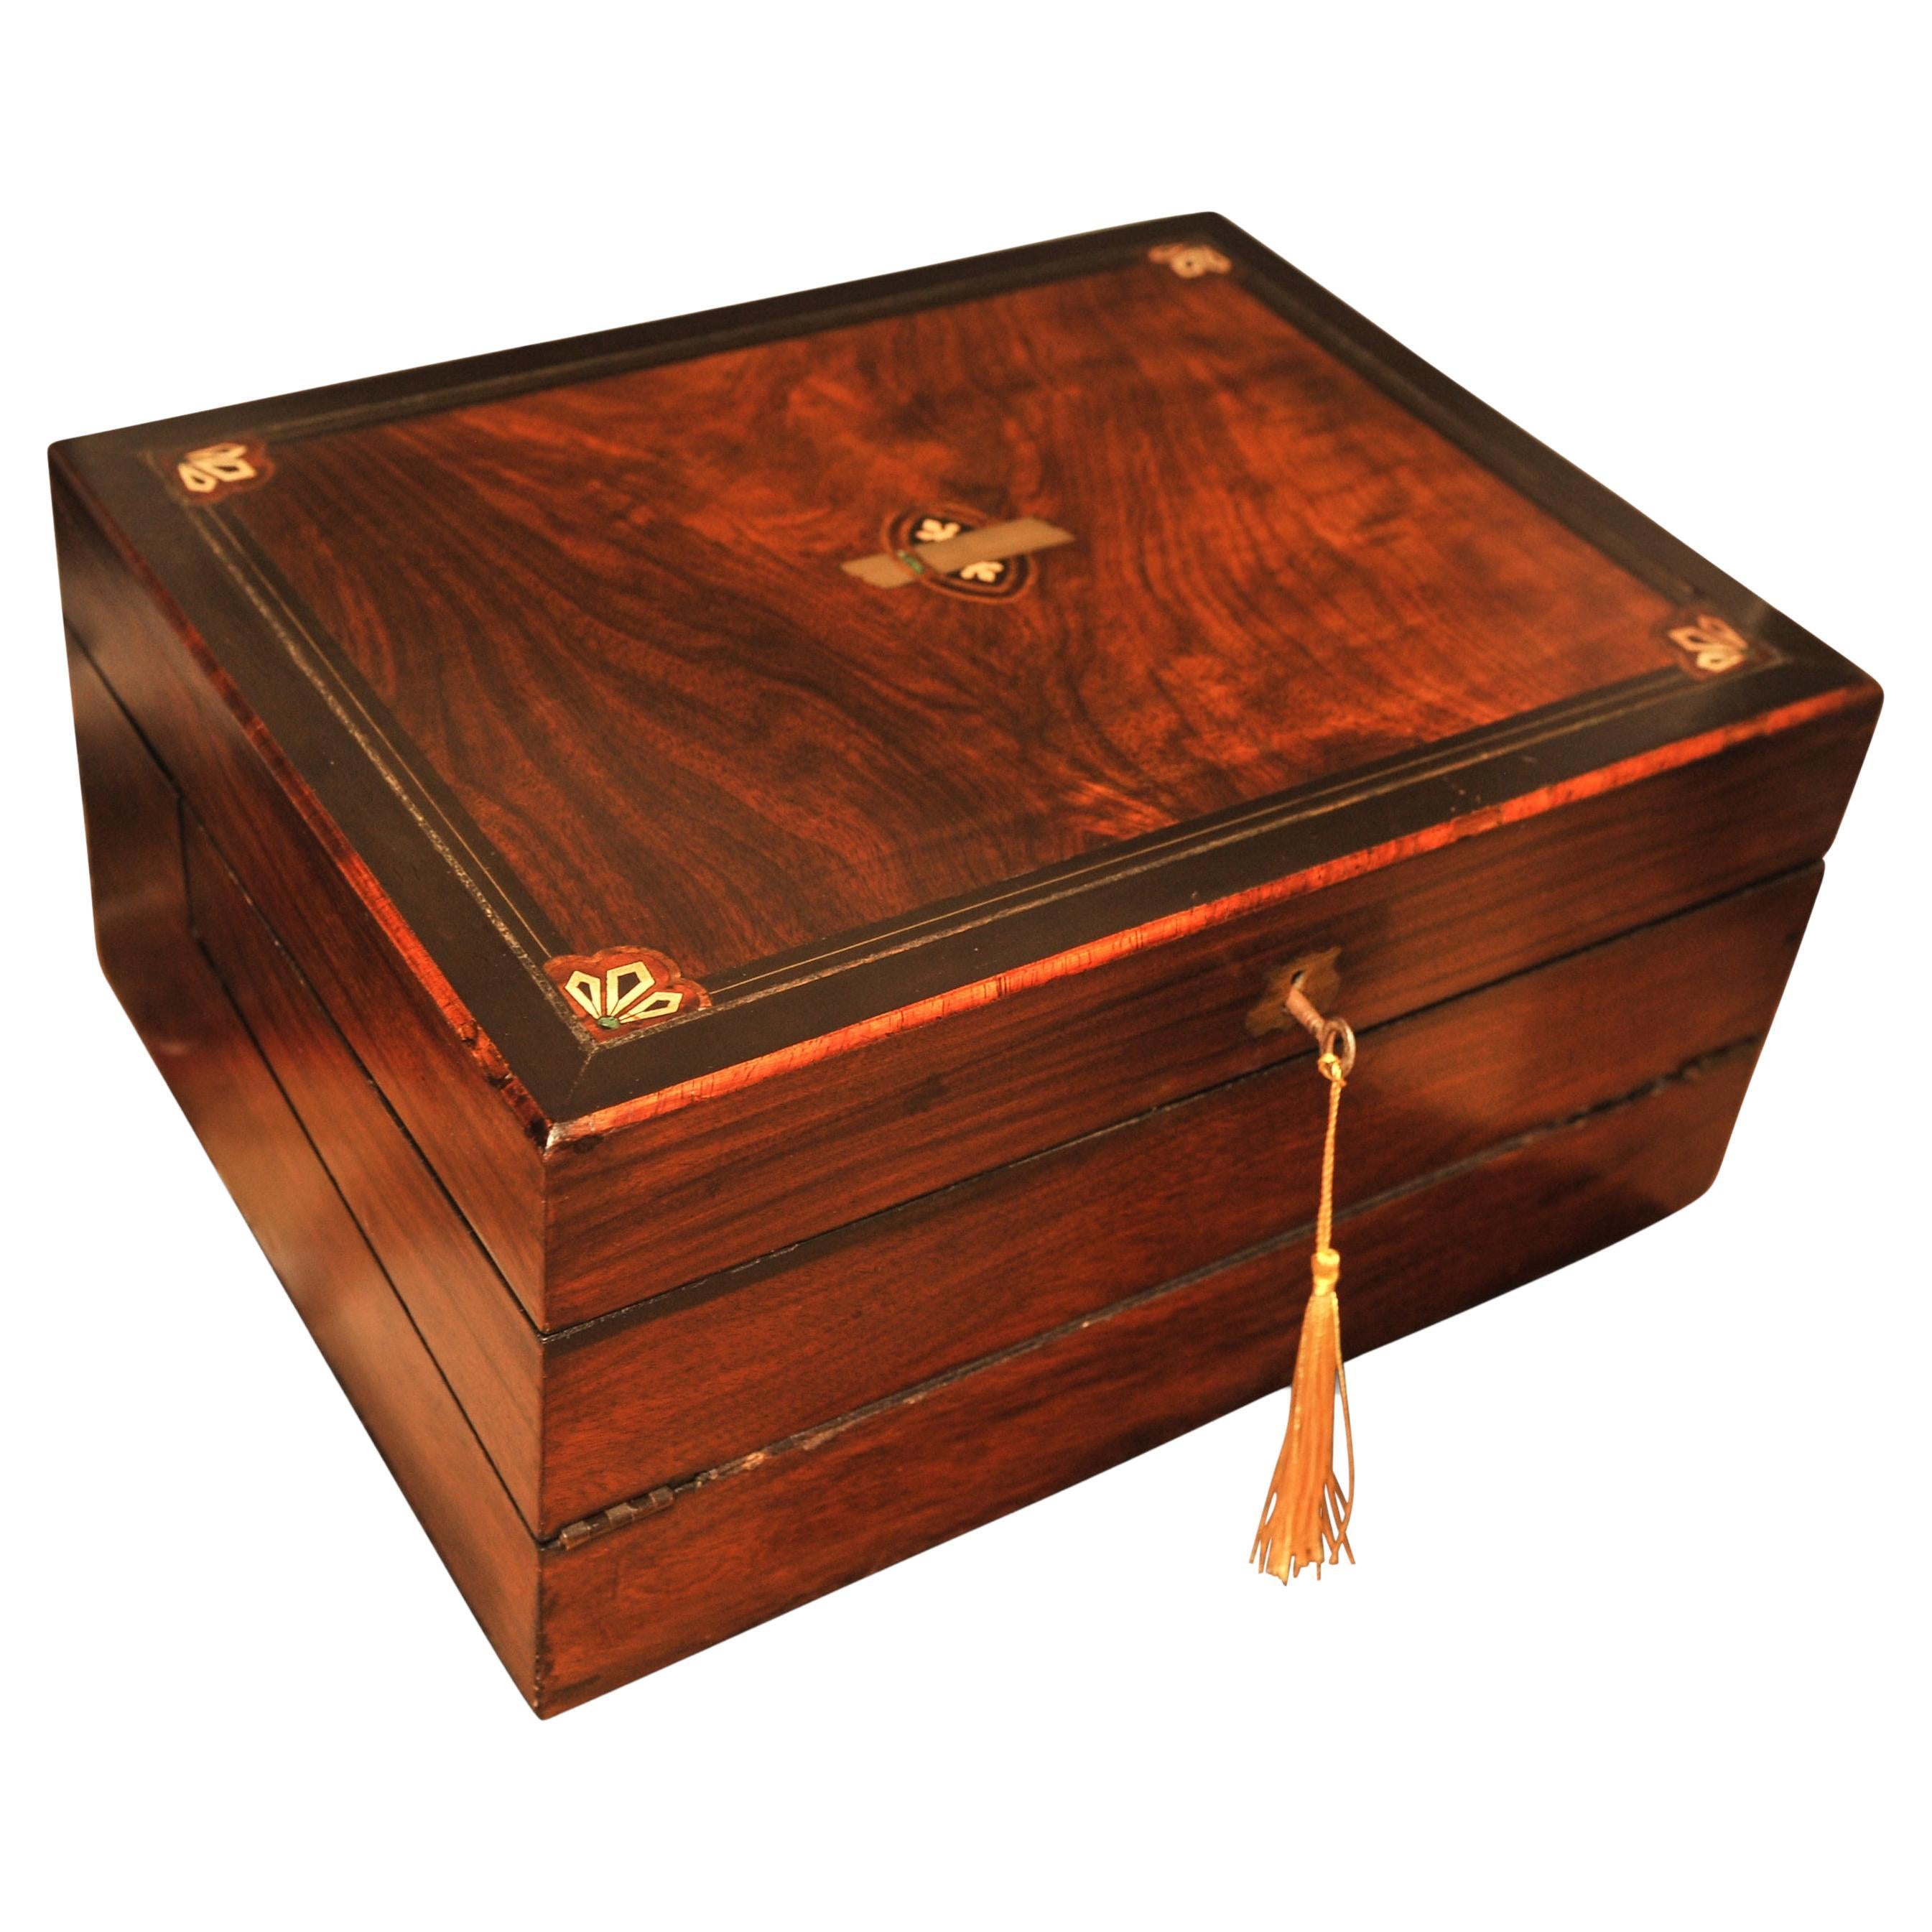 Elegant 19th Century Victorian Flame Mahogany Decorative Inlaid Writing Slope With Black Ebonised Accents & Fitted Stationary Compartments With A Tooled Leather Interior 

Supplied with two glass inkwells 
A new notepad 
A vintage ink pen 
A Modern